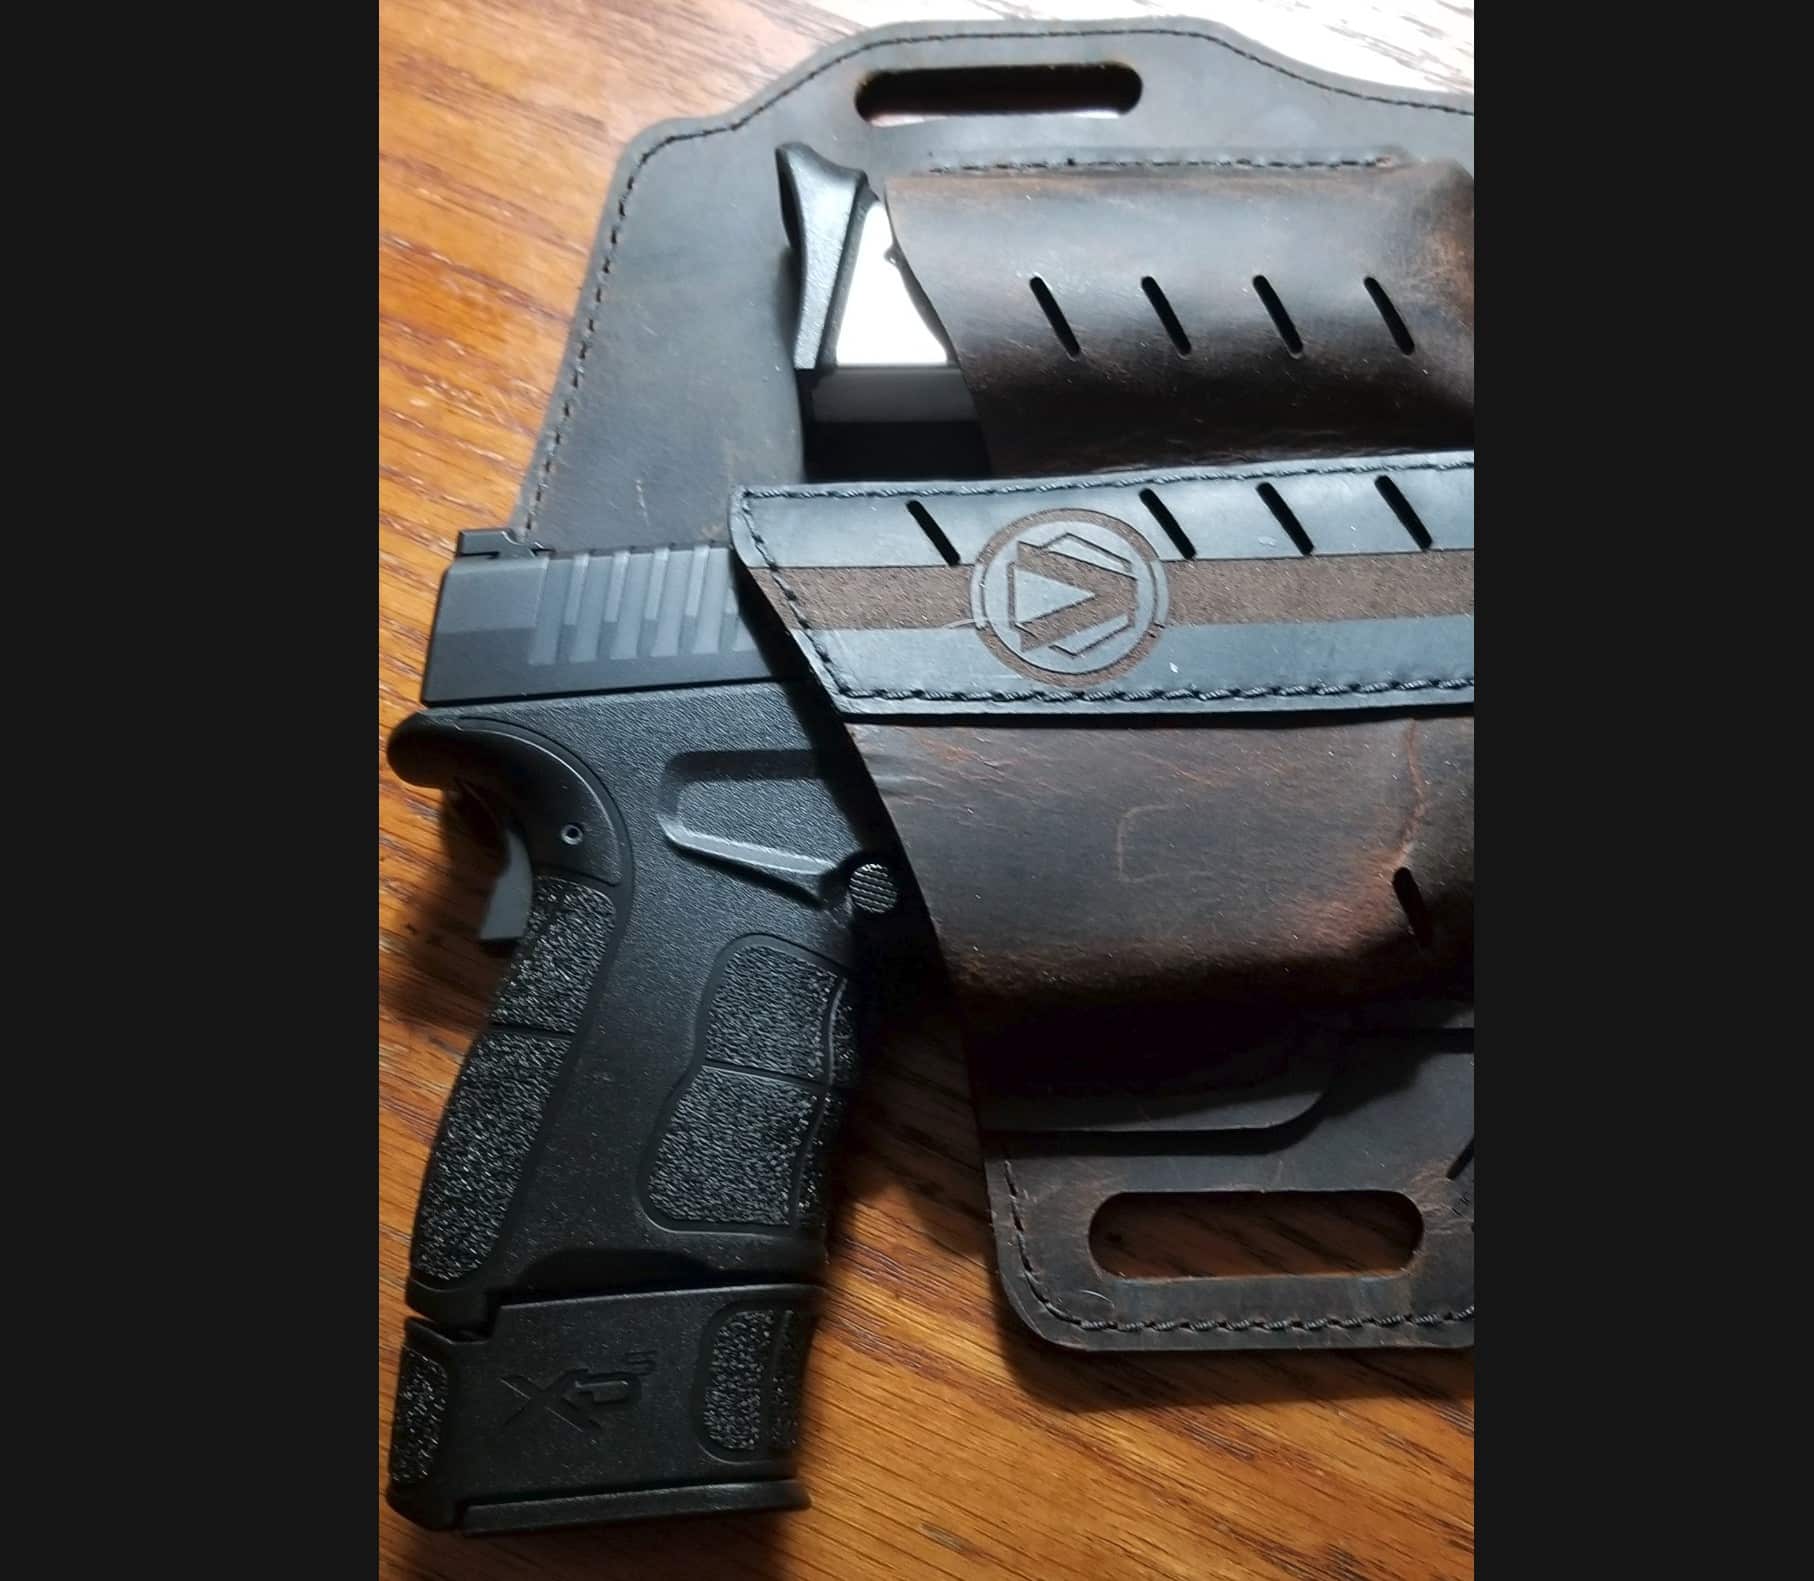 #DIGTHERIG – Gary and his Springfield XDs MOD.2 in a Versacarry Holster